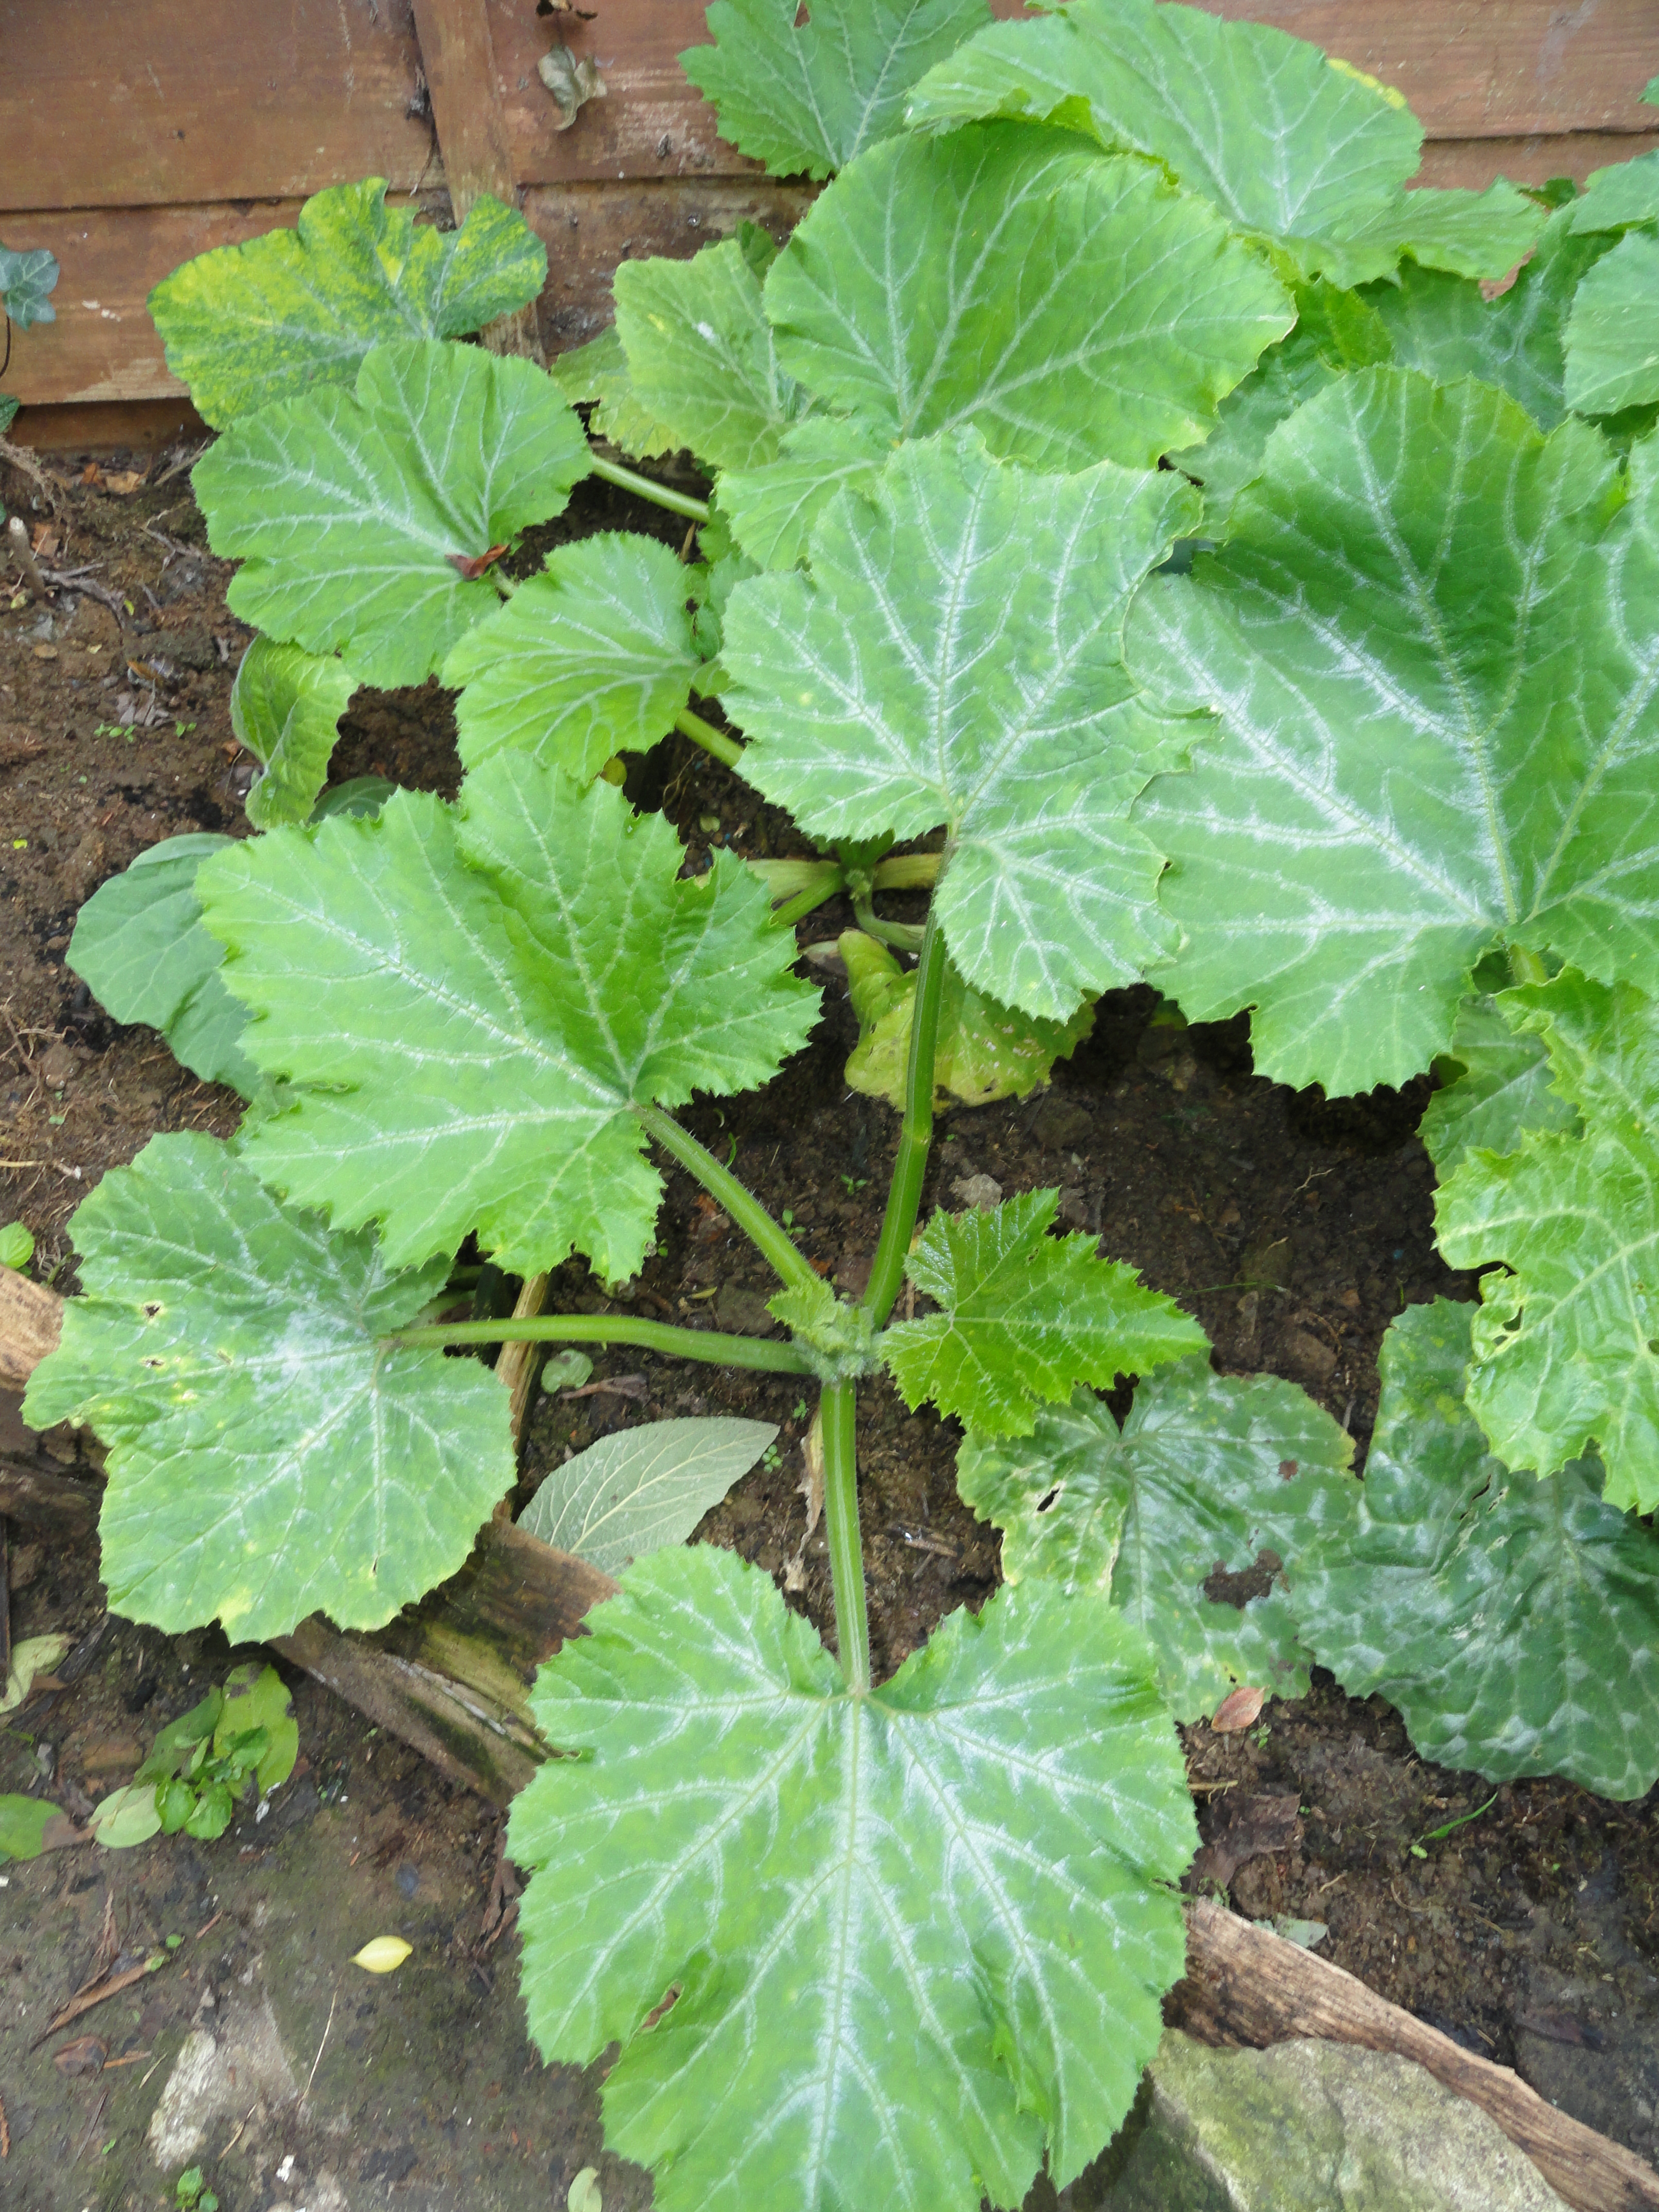 Courgettes in the veg plot